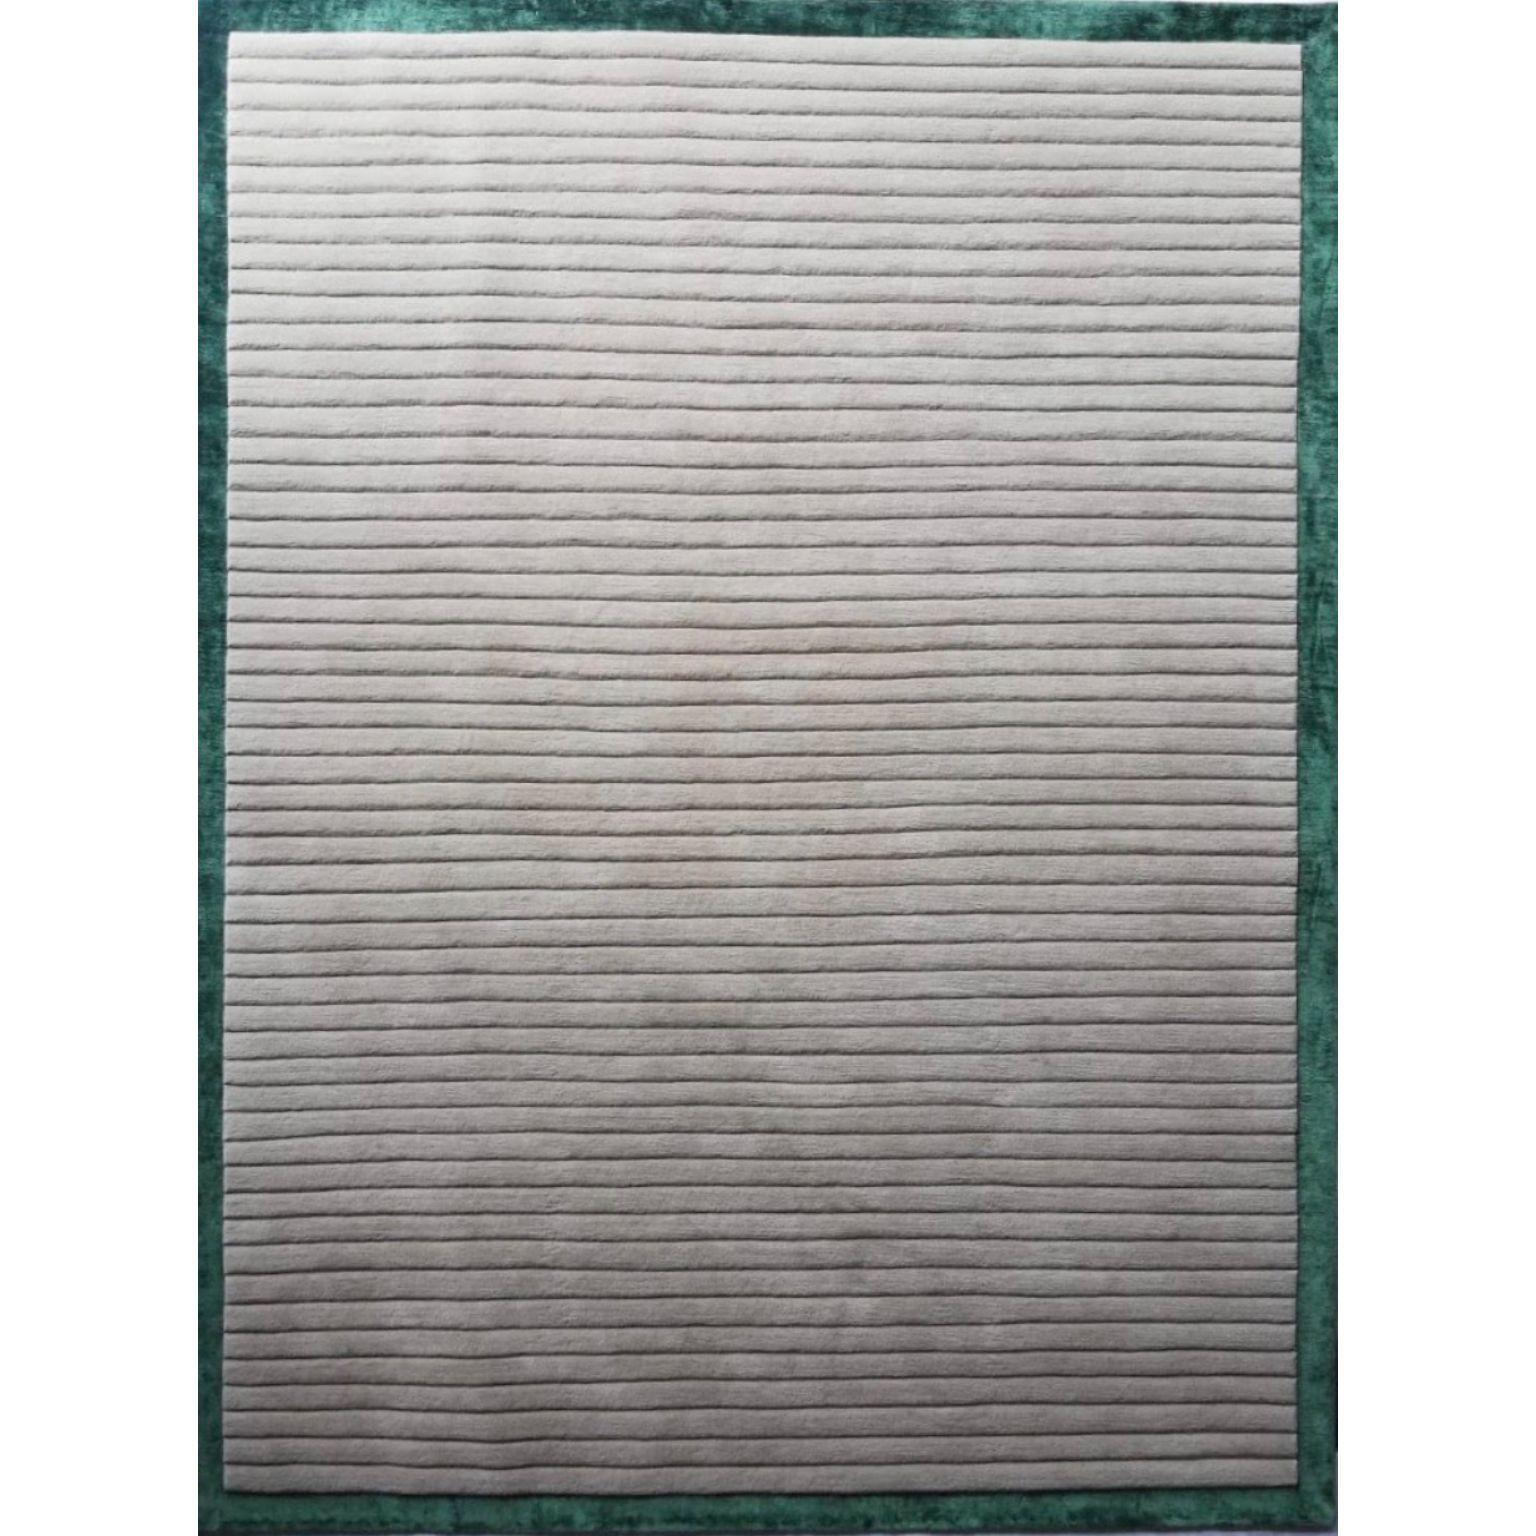 Corduroy framed medium rug by Art & Loom
Dimensions: D274.3 x H365.8 cm
Materials: New Zealand wool & Chinese silk
Quality (Knots per Inch): 100
Also available in different dimensions.

Samantha Gallacher has always had a keen eye for